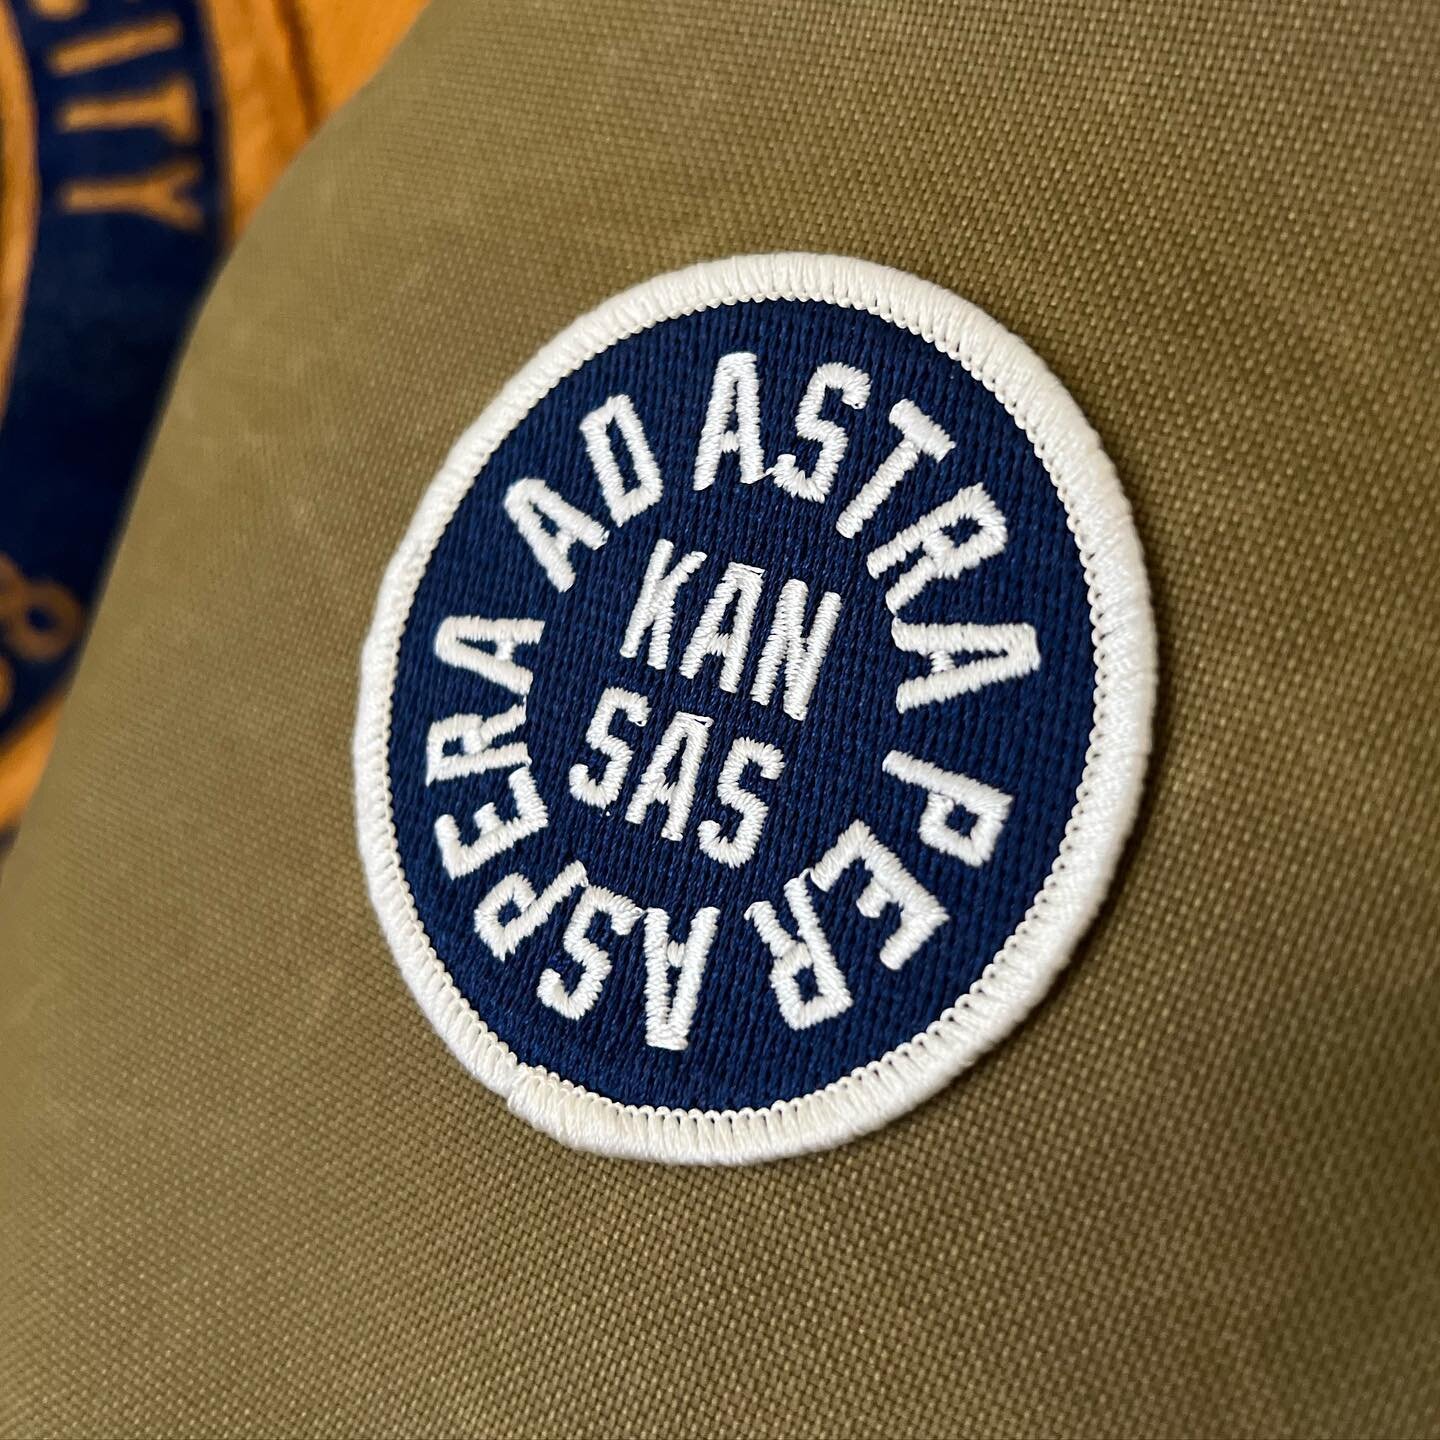 NEW PRODUCTS! 👀
&mdash;
Yep! Patches! 🙌🏽 Not just any patches but our new Kinfolk threadlines feature:
&mdash;
☑️ A 100% veteran owned partnership!
☑️ Embroidered with thread sourced and verified from 100% recycled post-consumer plastic!
☑️ Togeth